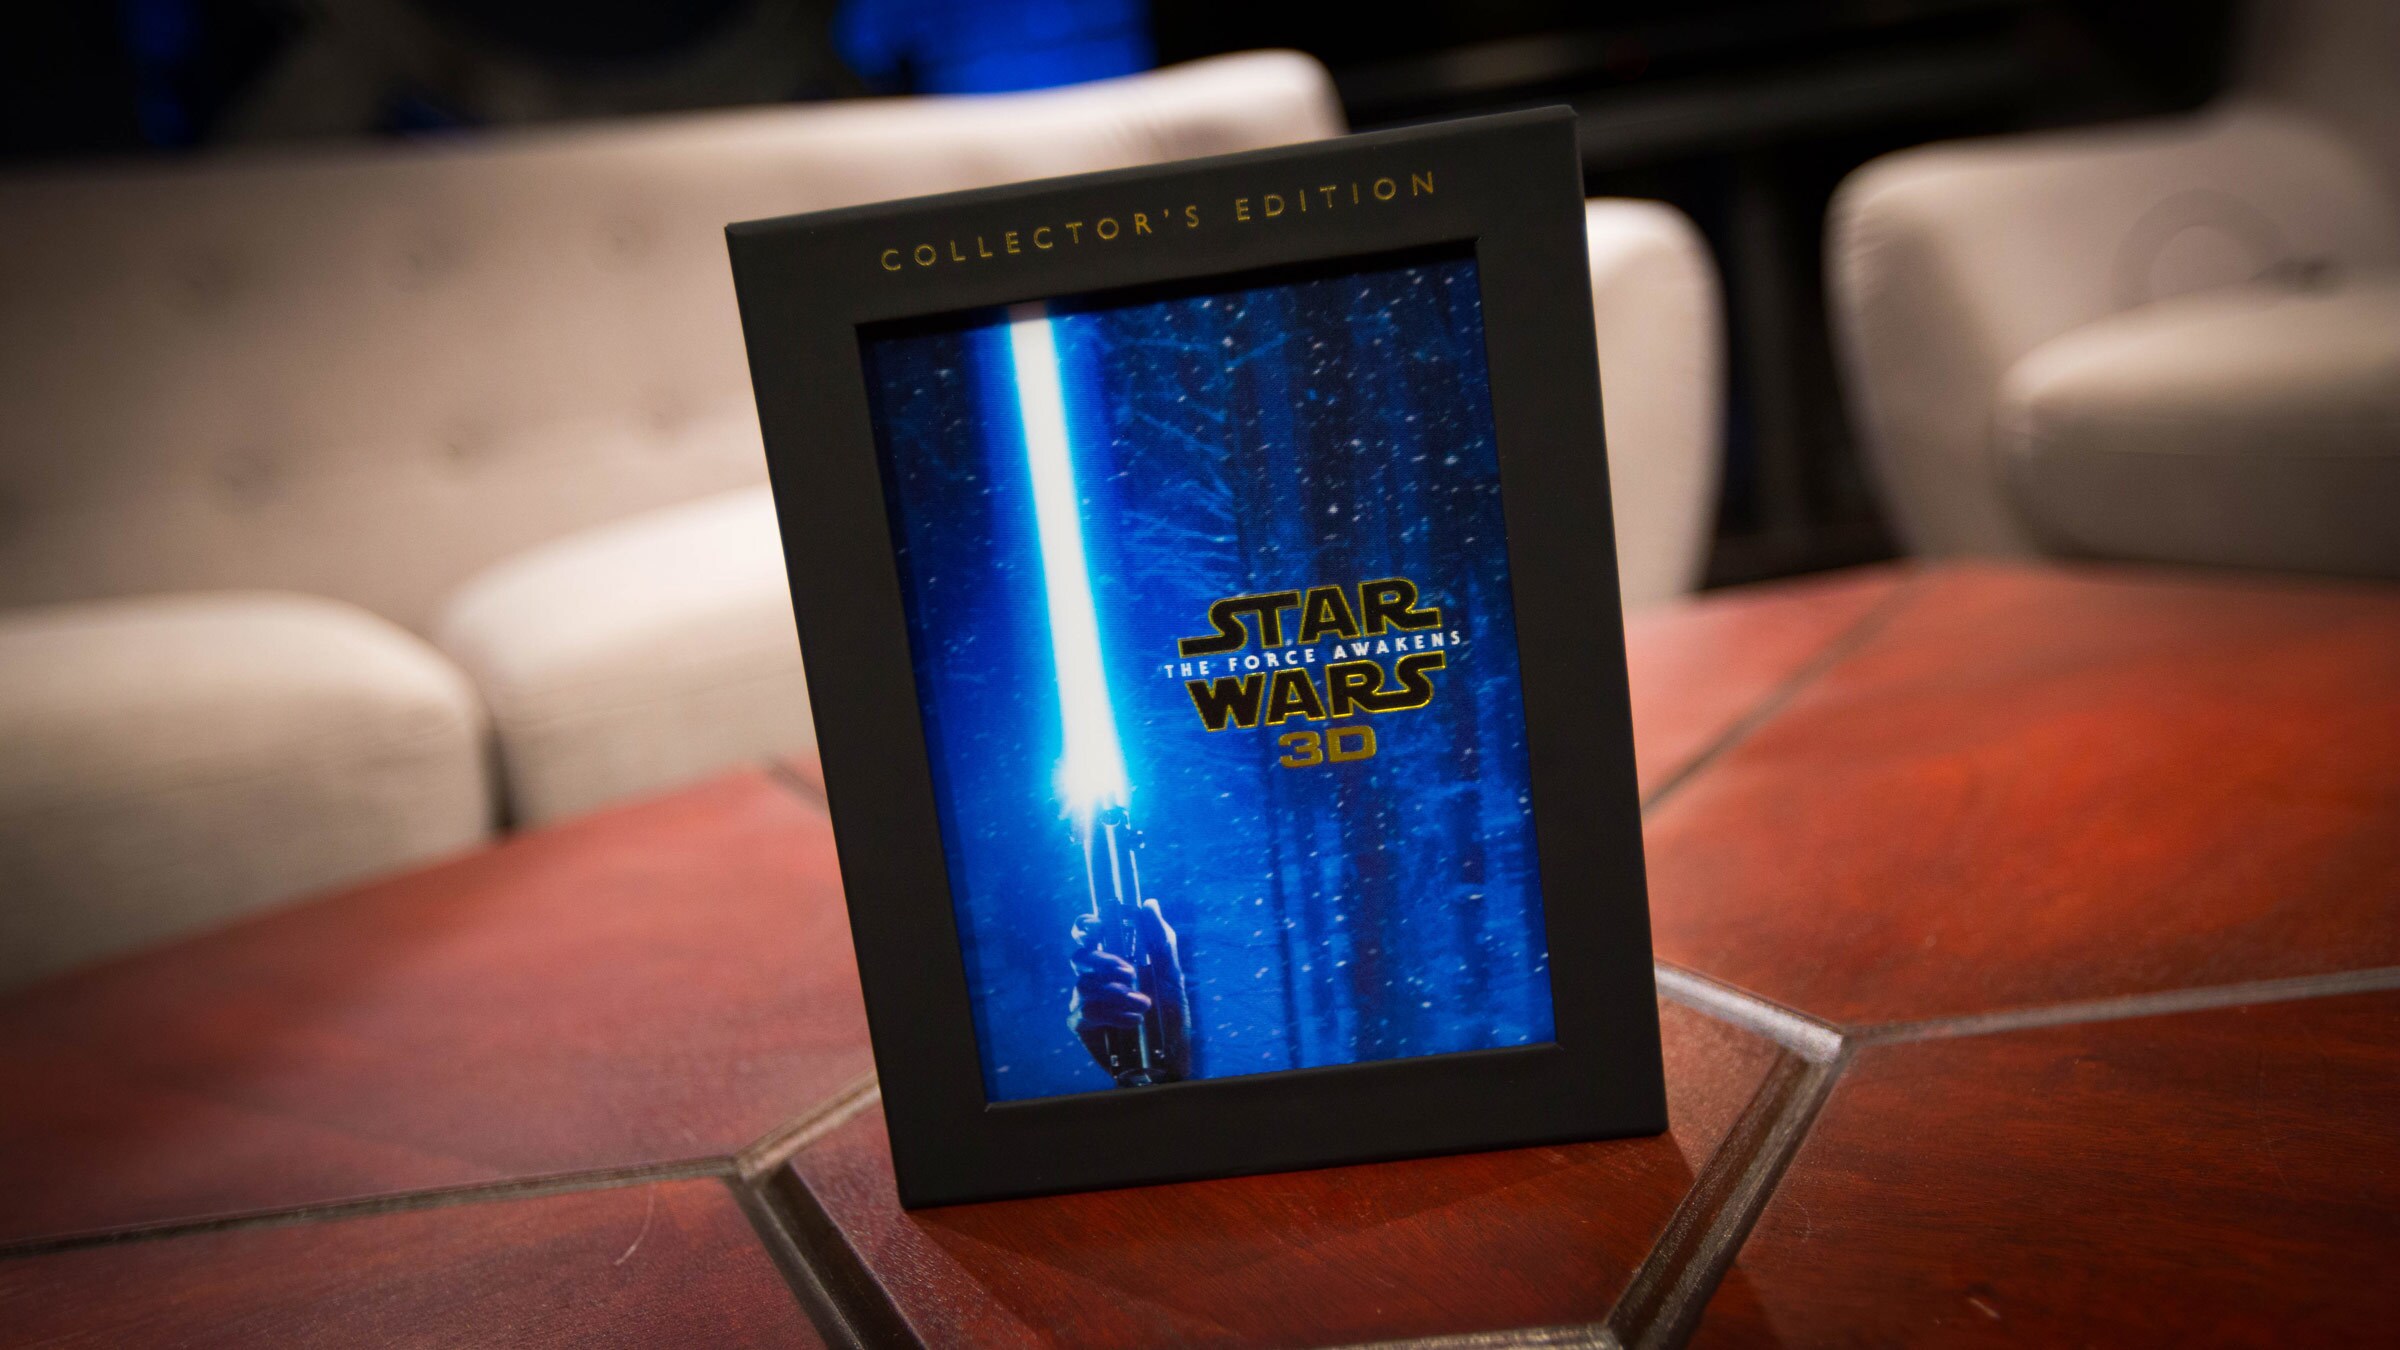 Star Wars Blu-Ray, DVD Re-Releases Coming This September